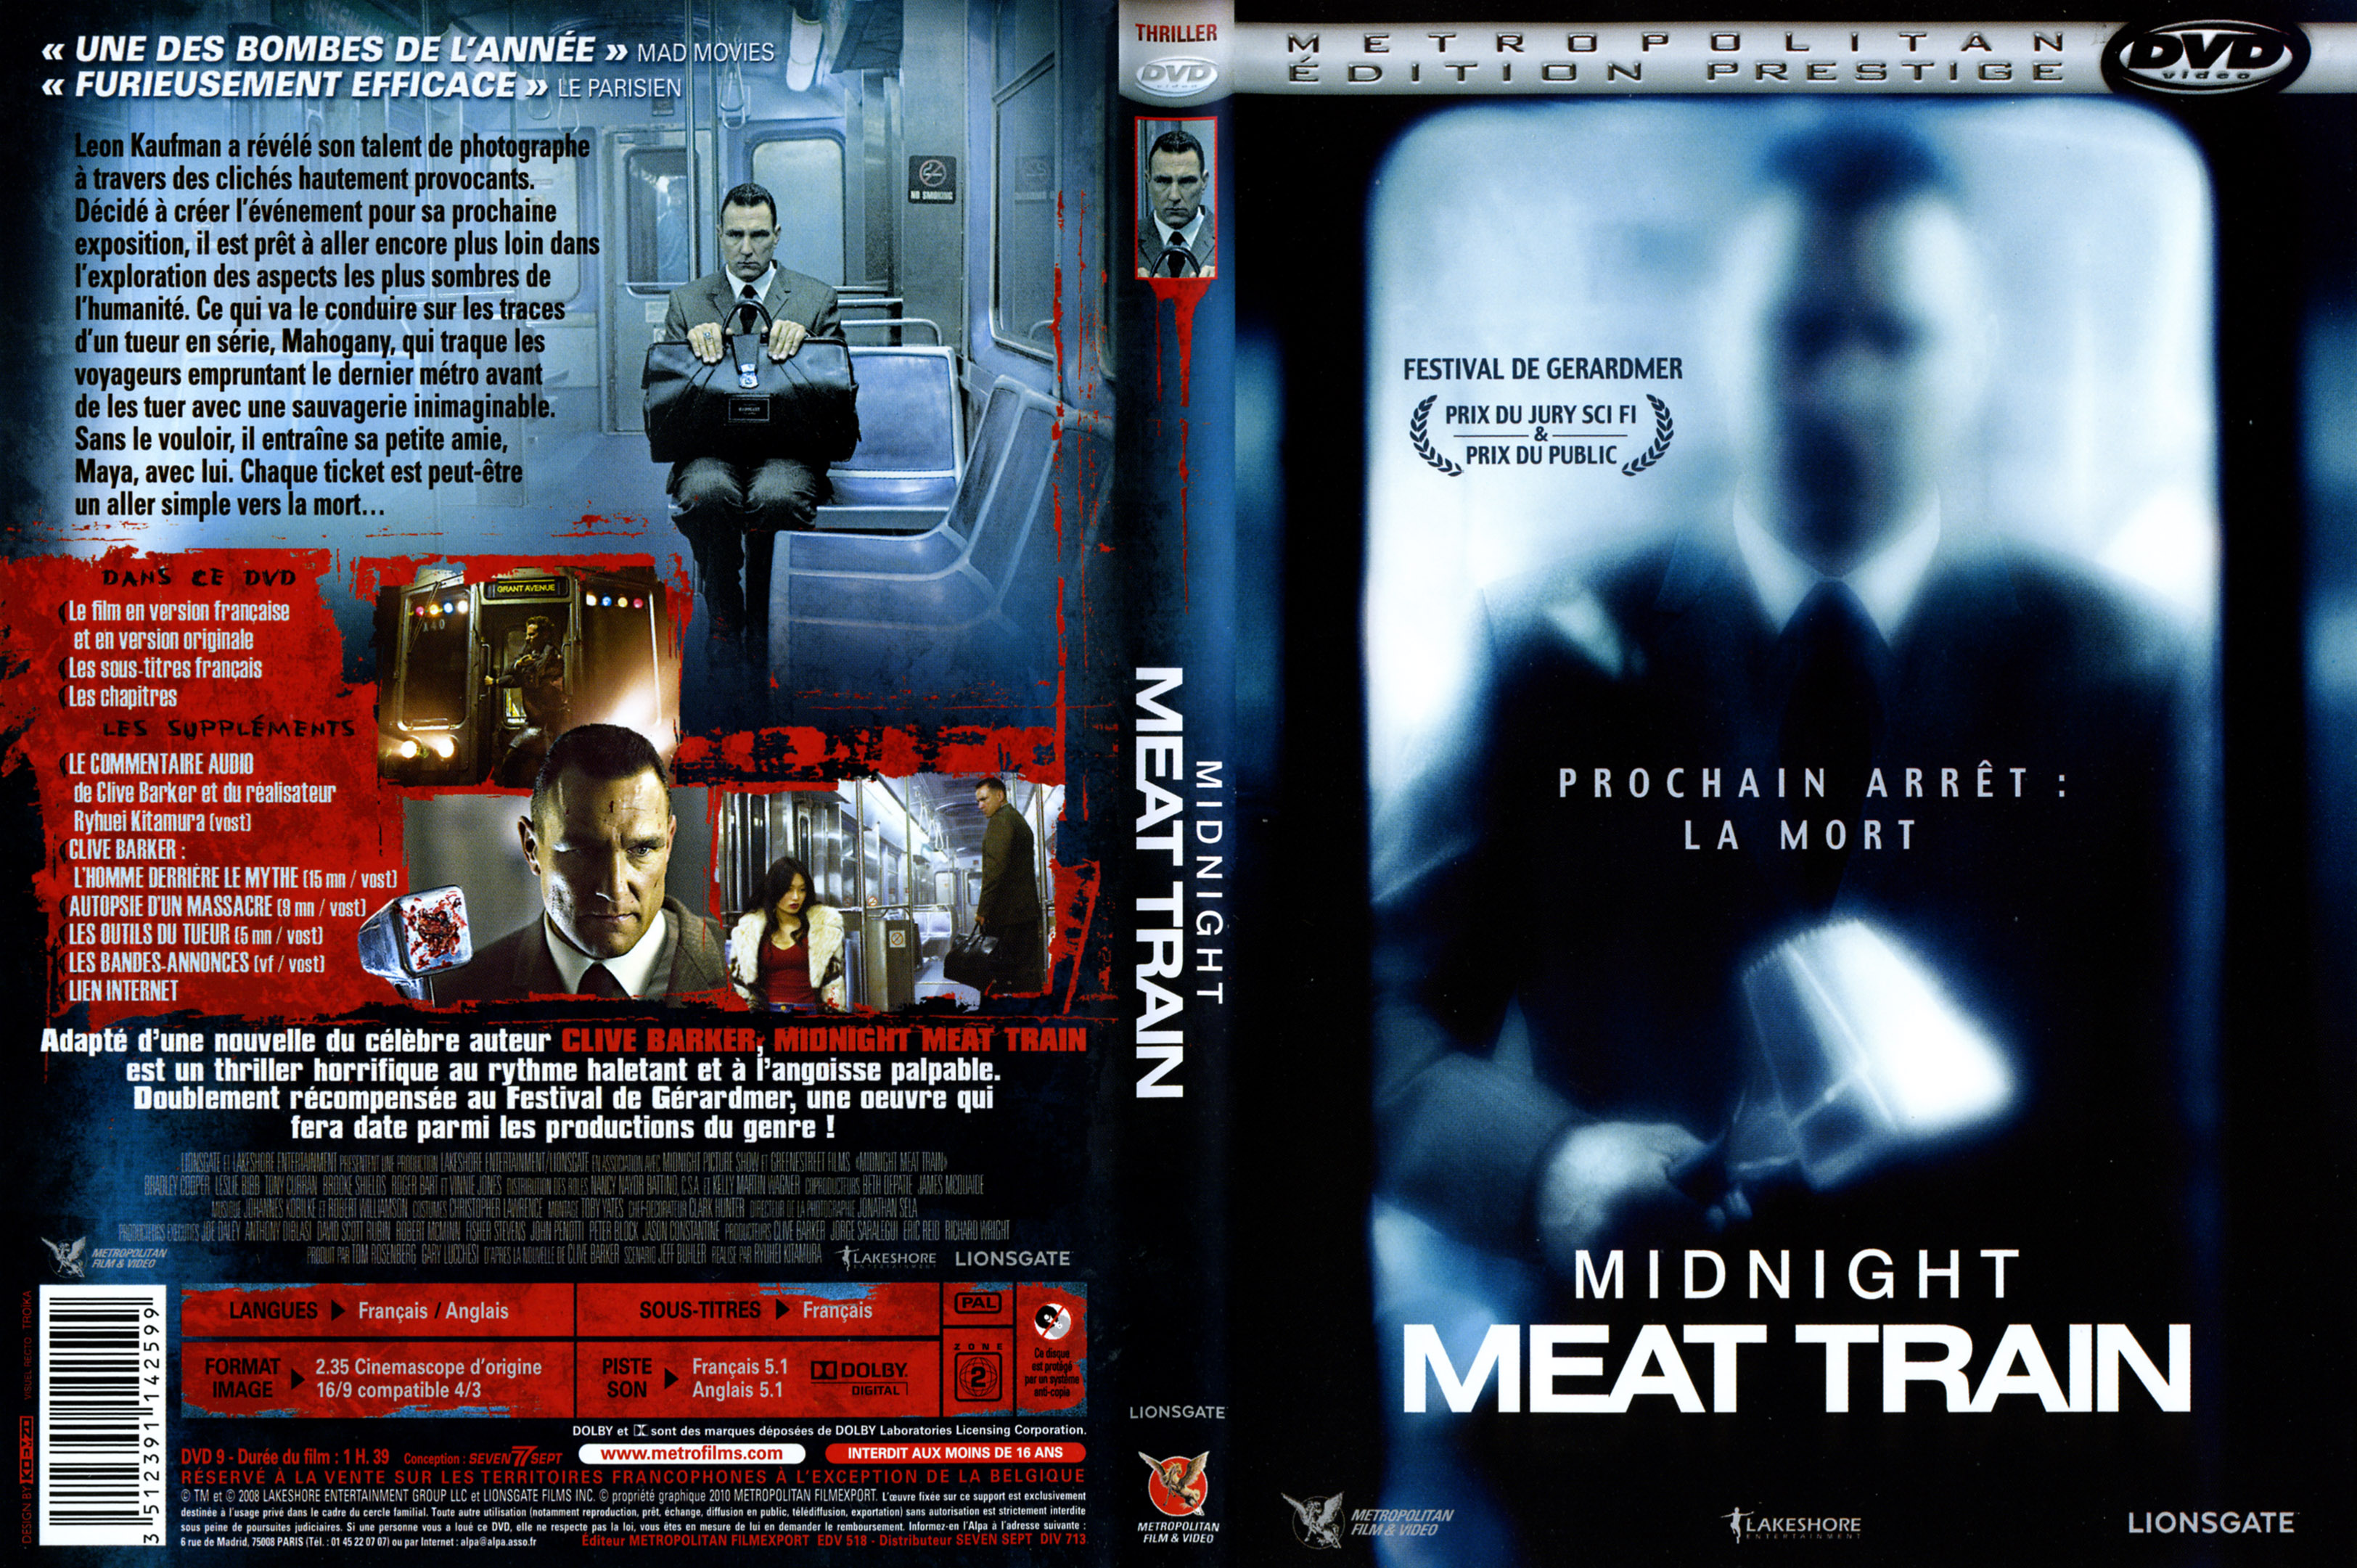 Jaquette DVD Midnight Meat Train